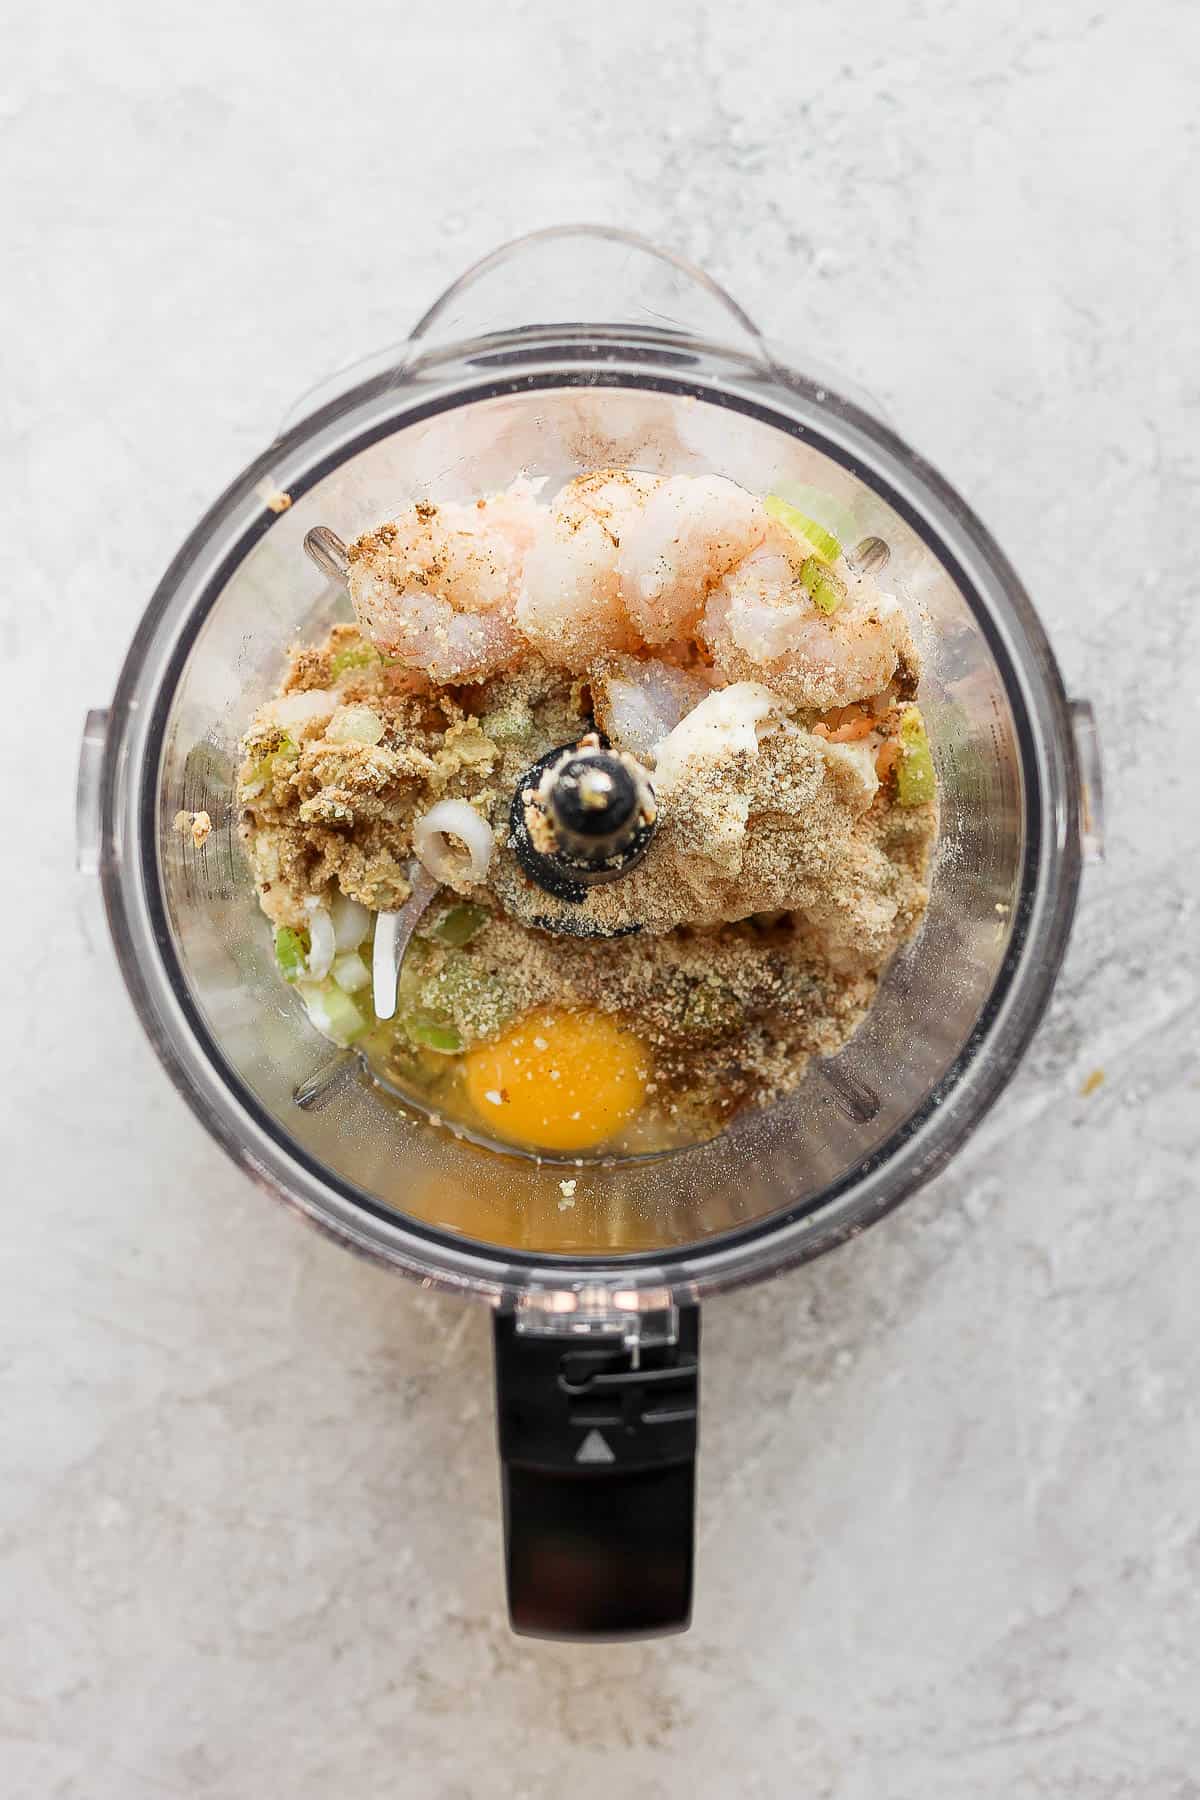 Ingredients for shrimp burgers in a food processor.